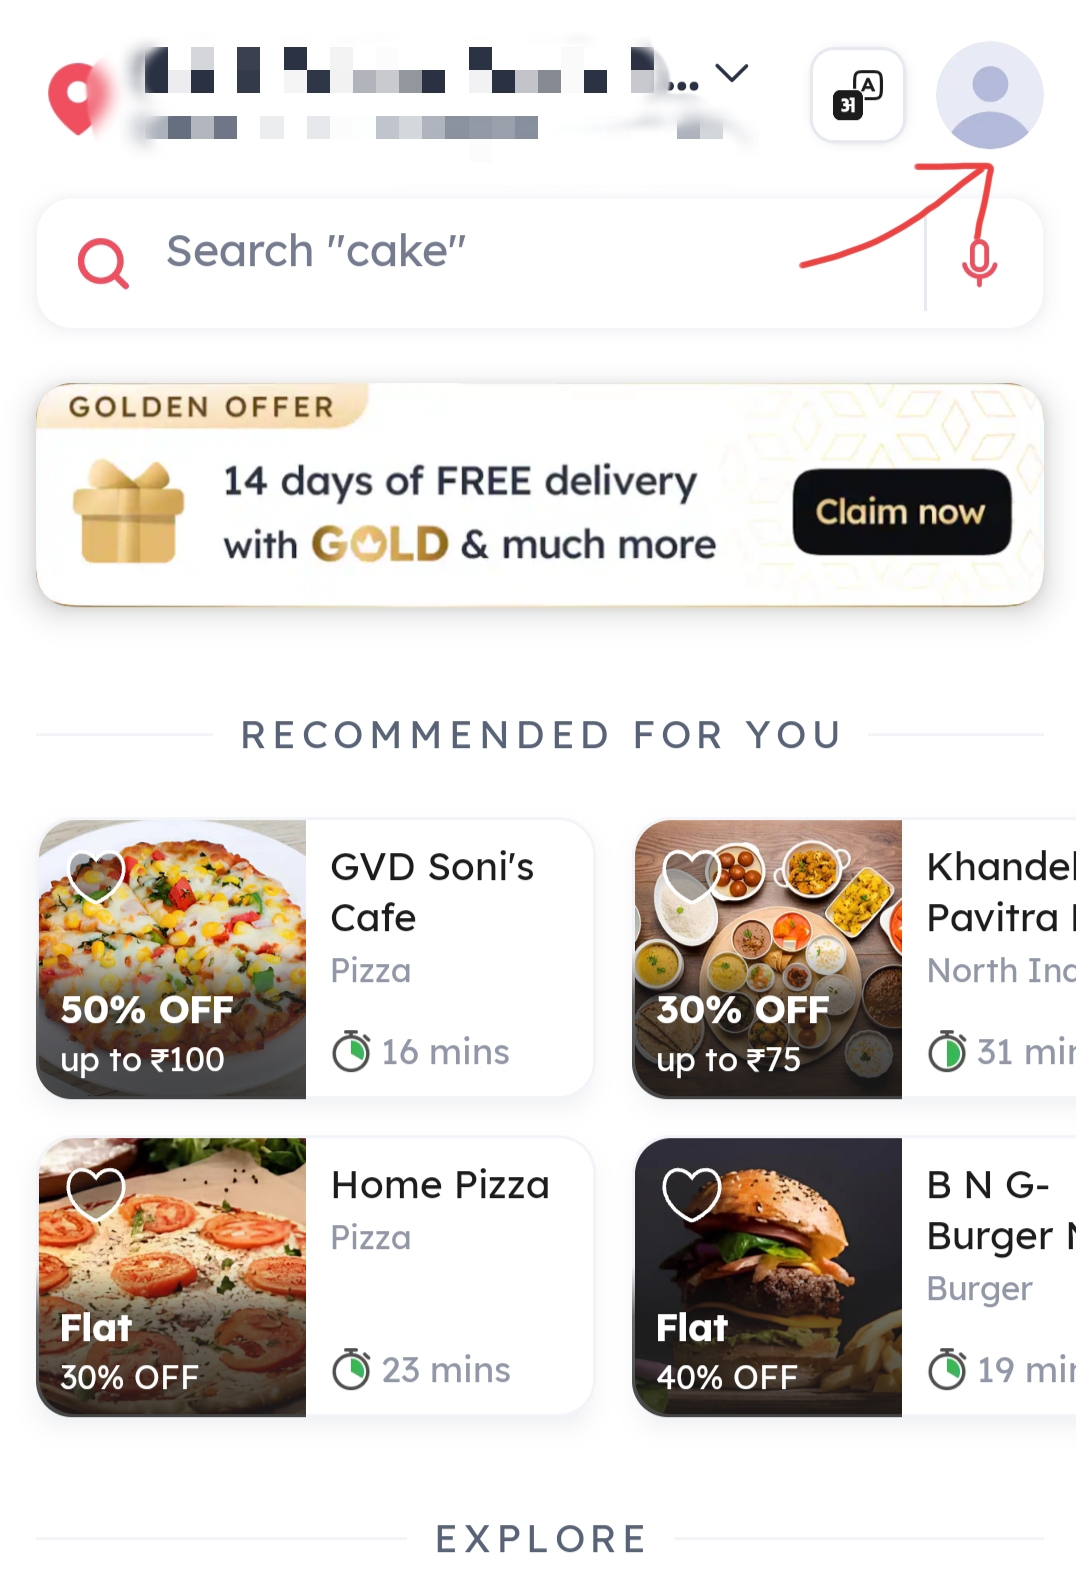 How to cancel order on Zomato